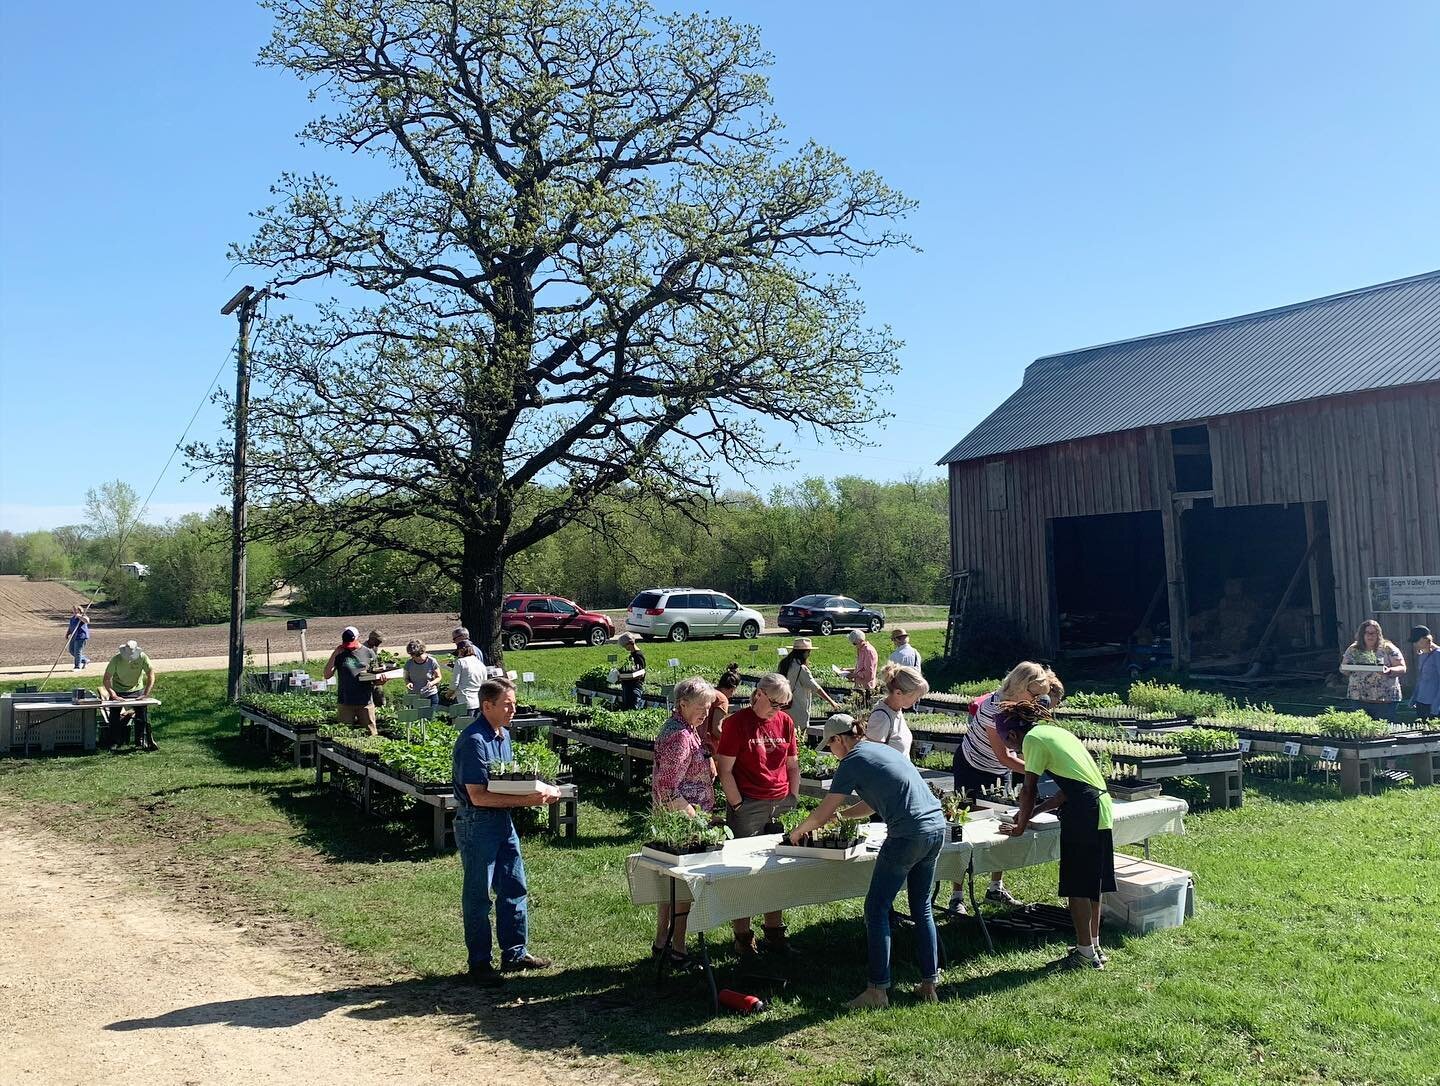 What a sweet, sweet weekend. We were
finally served goldilocks weather, and we took full advantage of it - we hope you did, too!

Thank you to everyone who traveled beyond convenience to purchase your garden starts from us. It was life-affirming to h